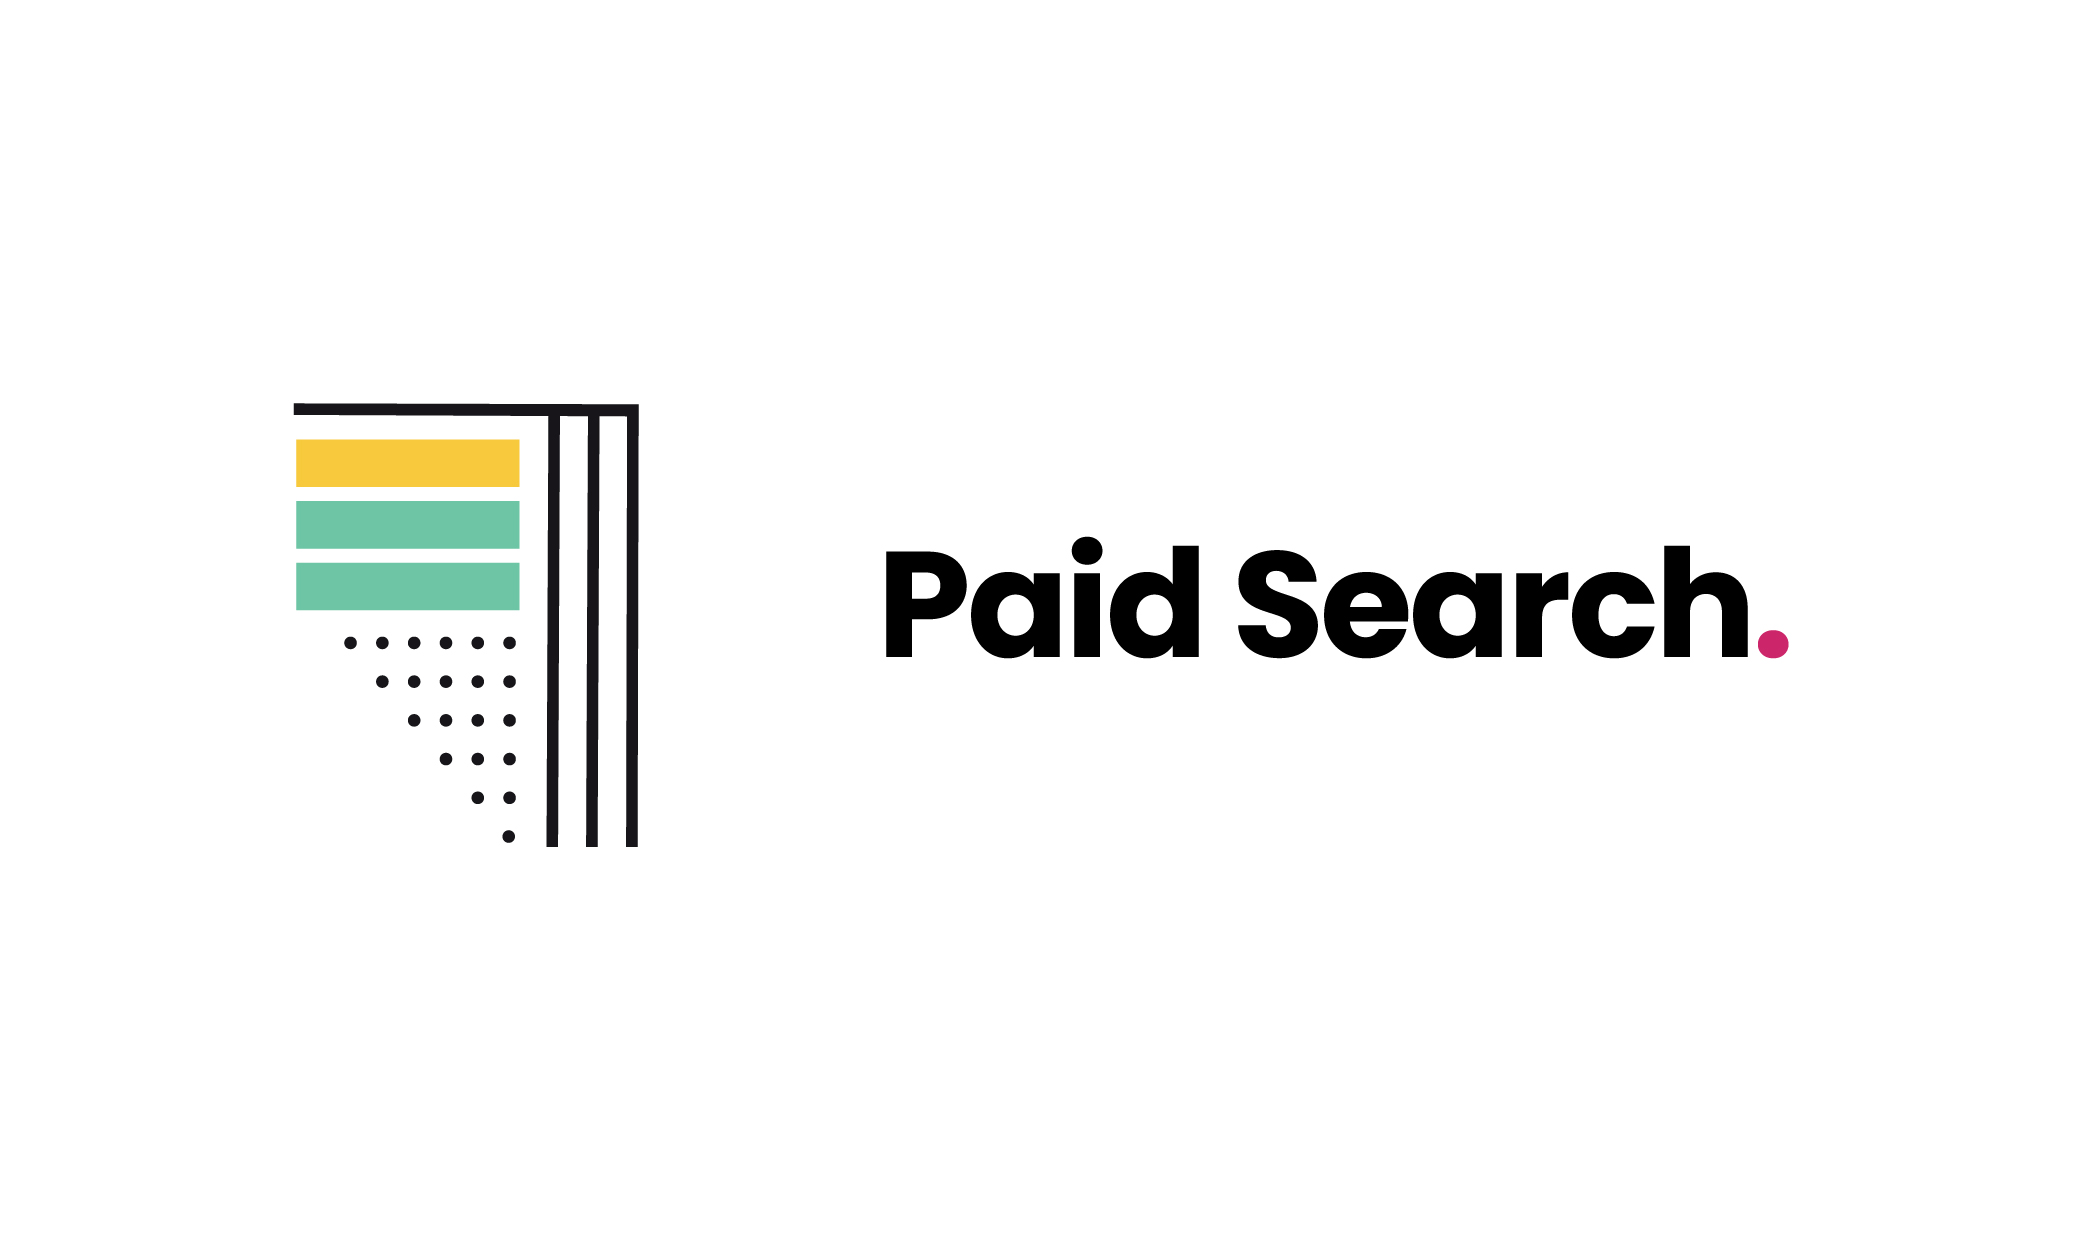 Formada Social offers paid search campaigns or PPC